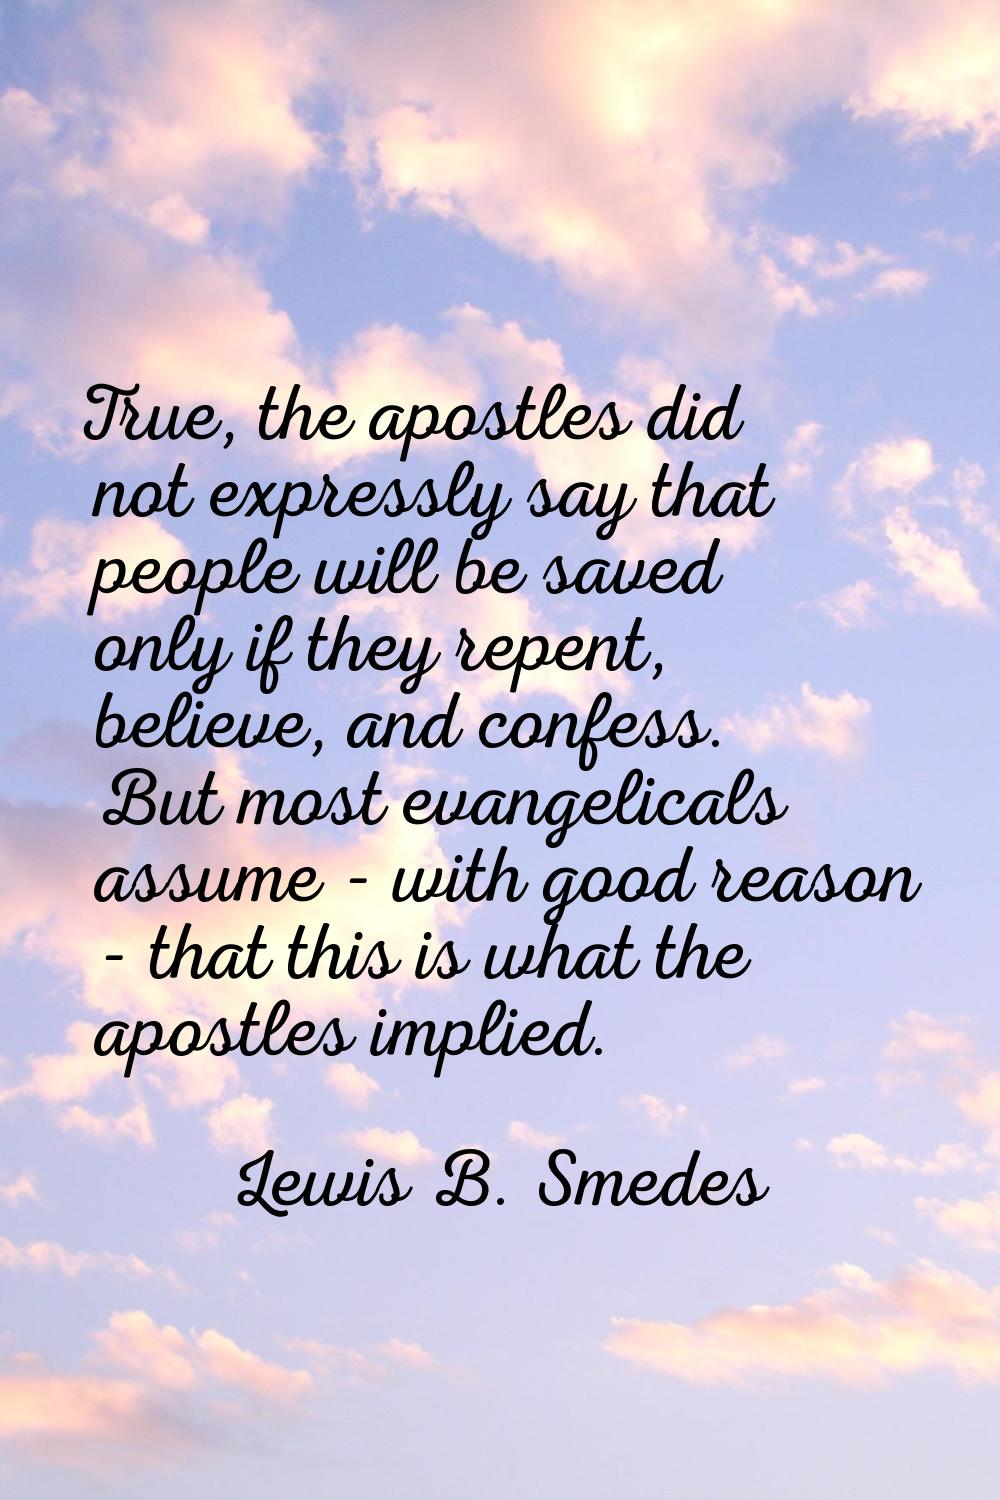 True, the apostles did not expressly say that people will be saved only if they repent, believe, an